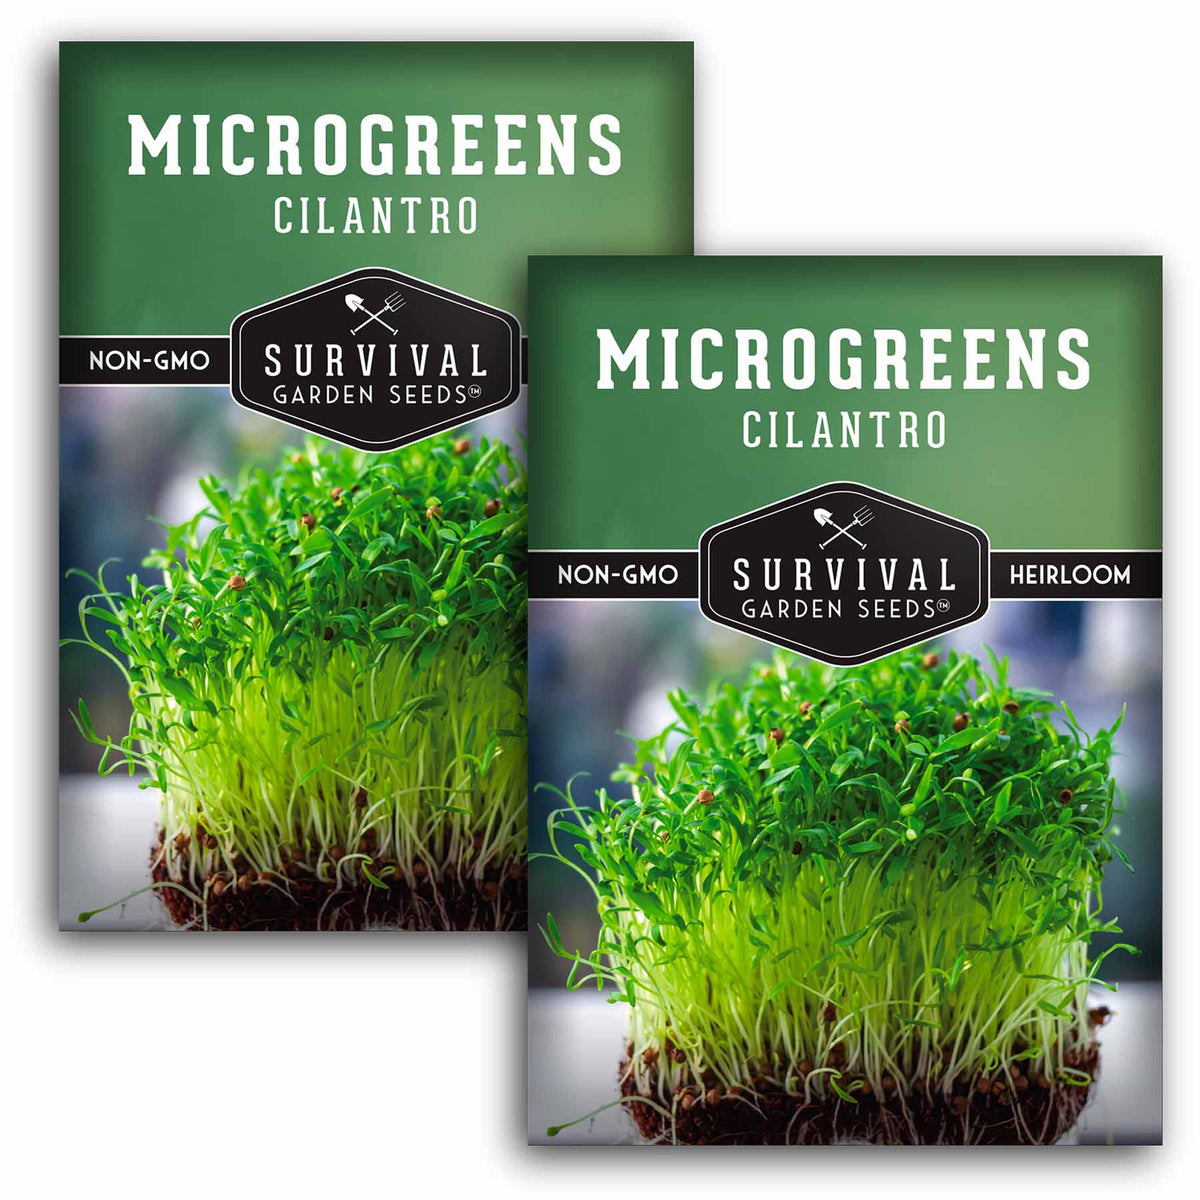 2 packets of Cilantro Microgreens seeds